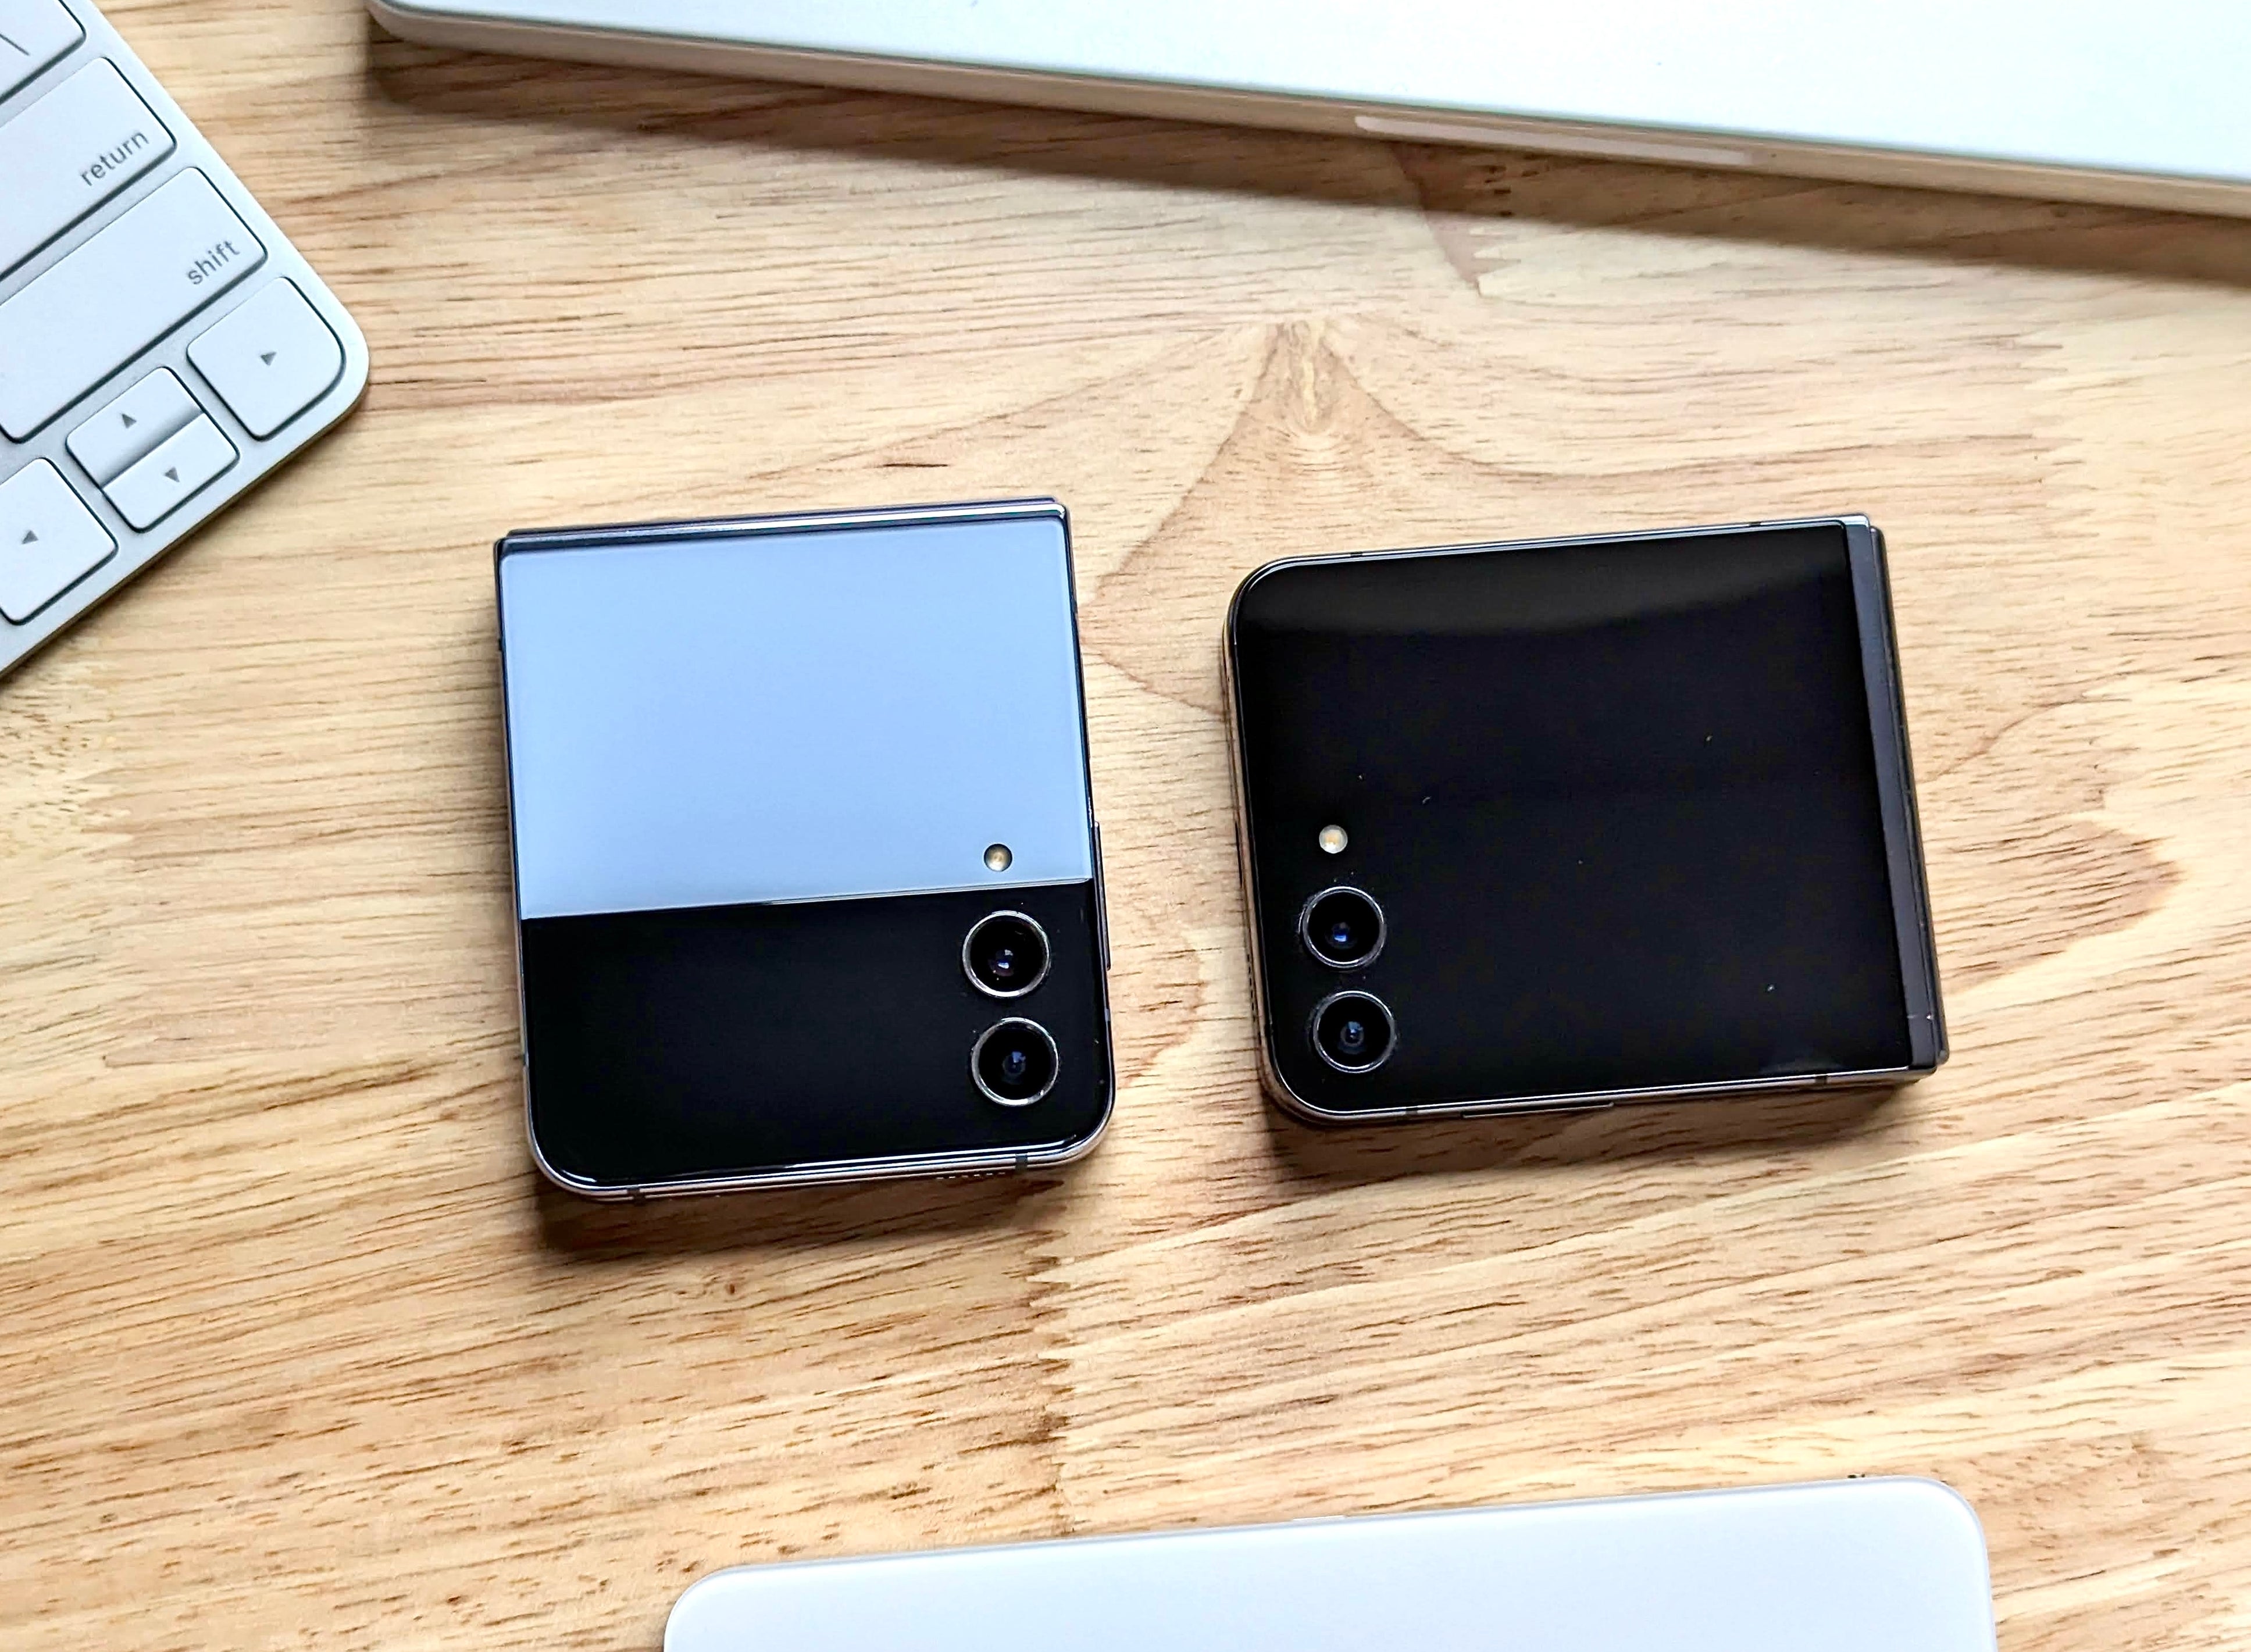 Fip 4 and Flip 5 next to each other, showing their identical camera lenses